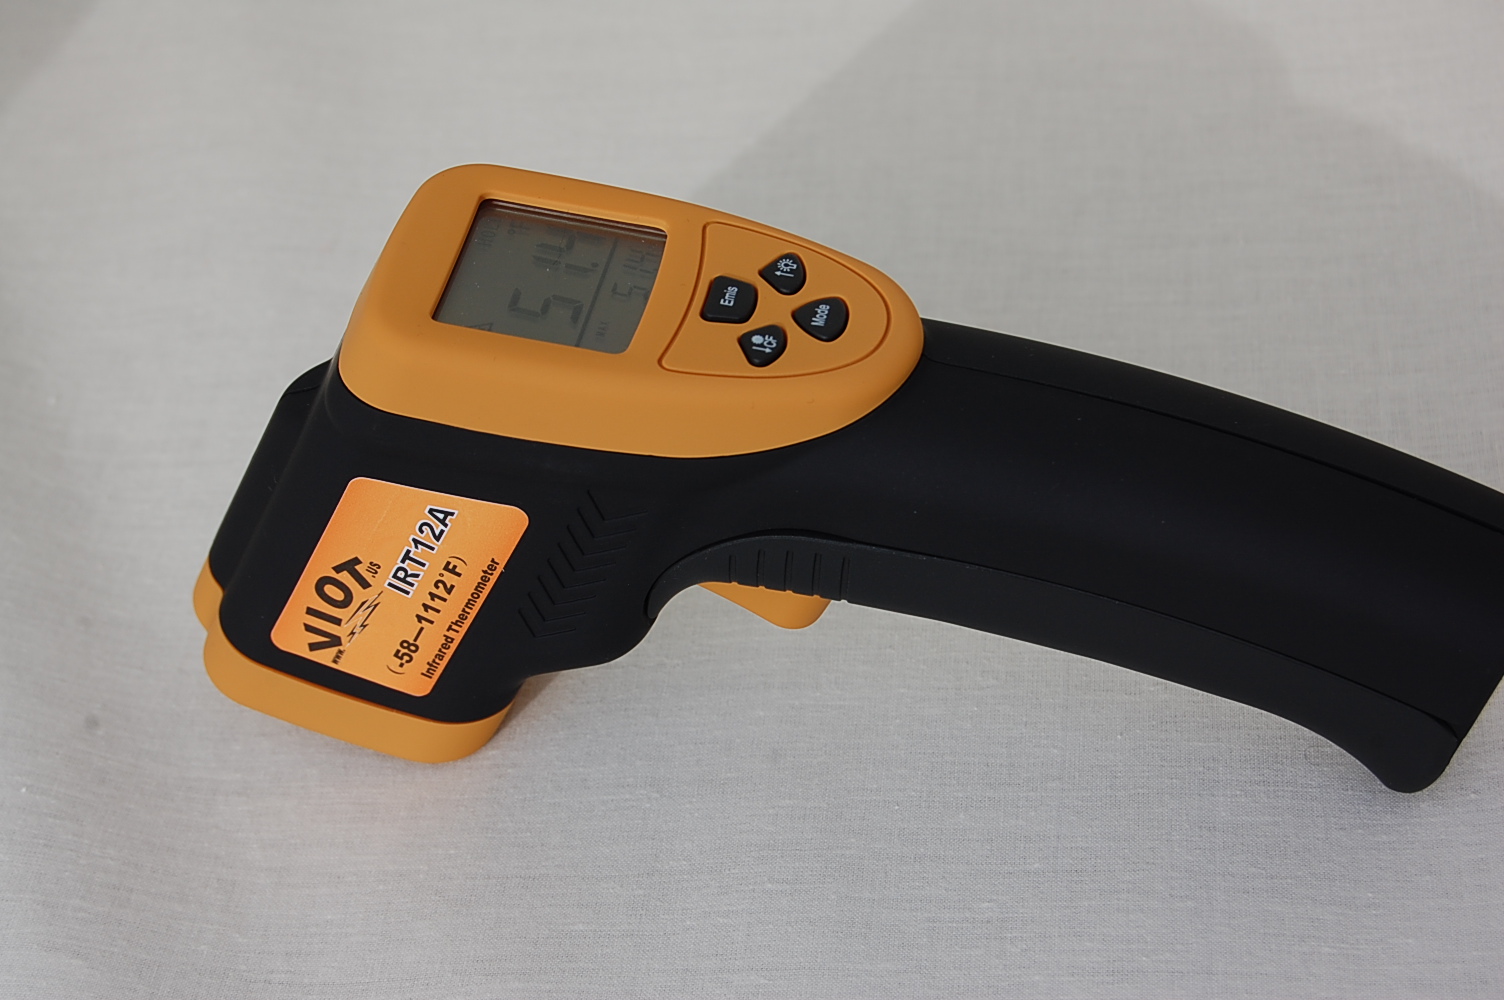 Infrared Digital Thermometer, Non-Contact, Quick body surface temperature scan diagnosis tool